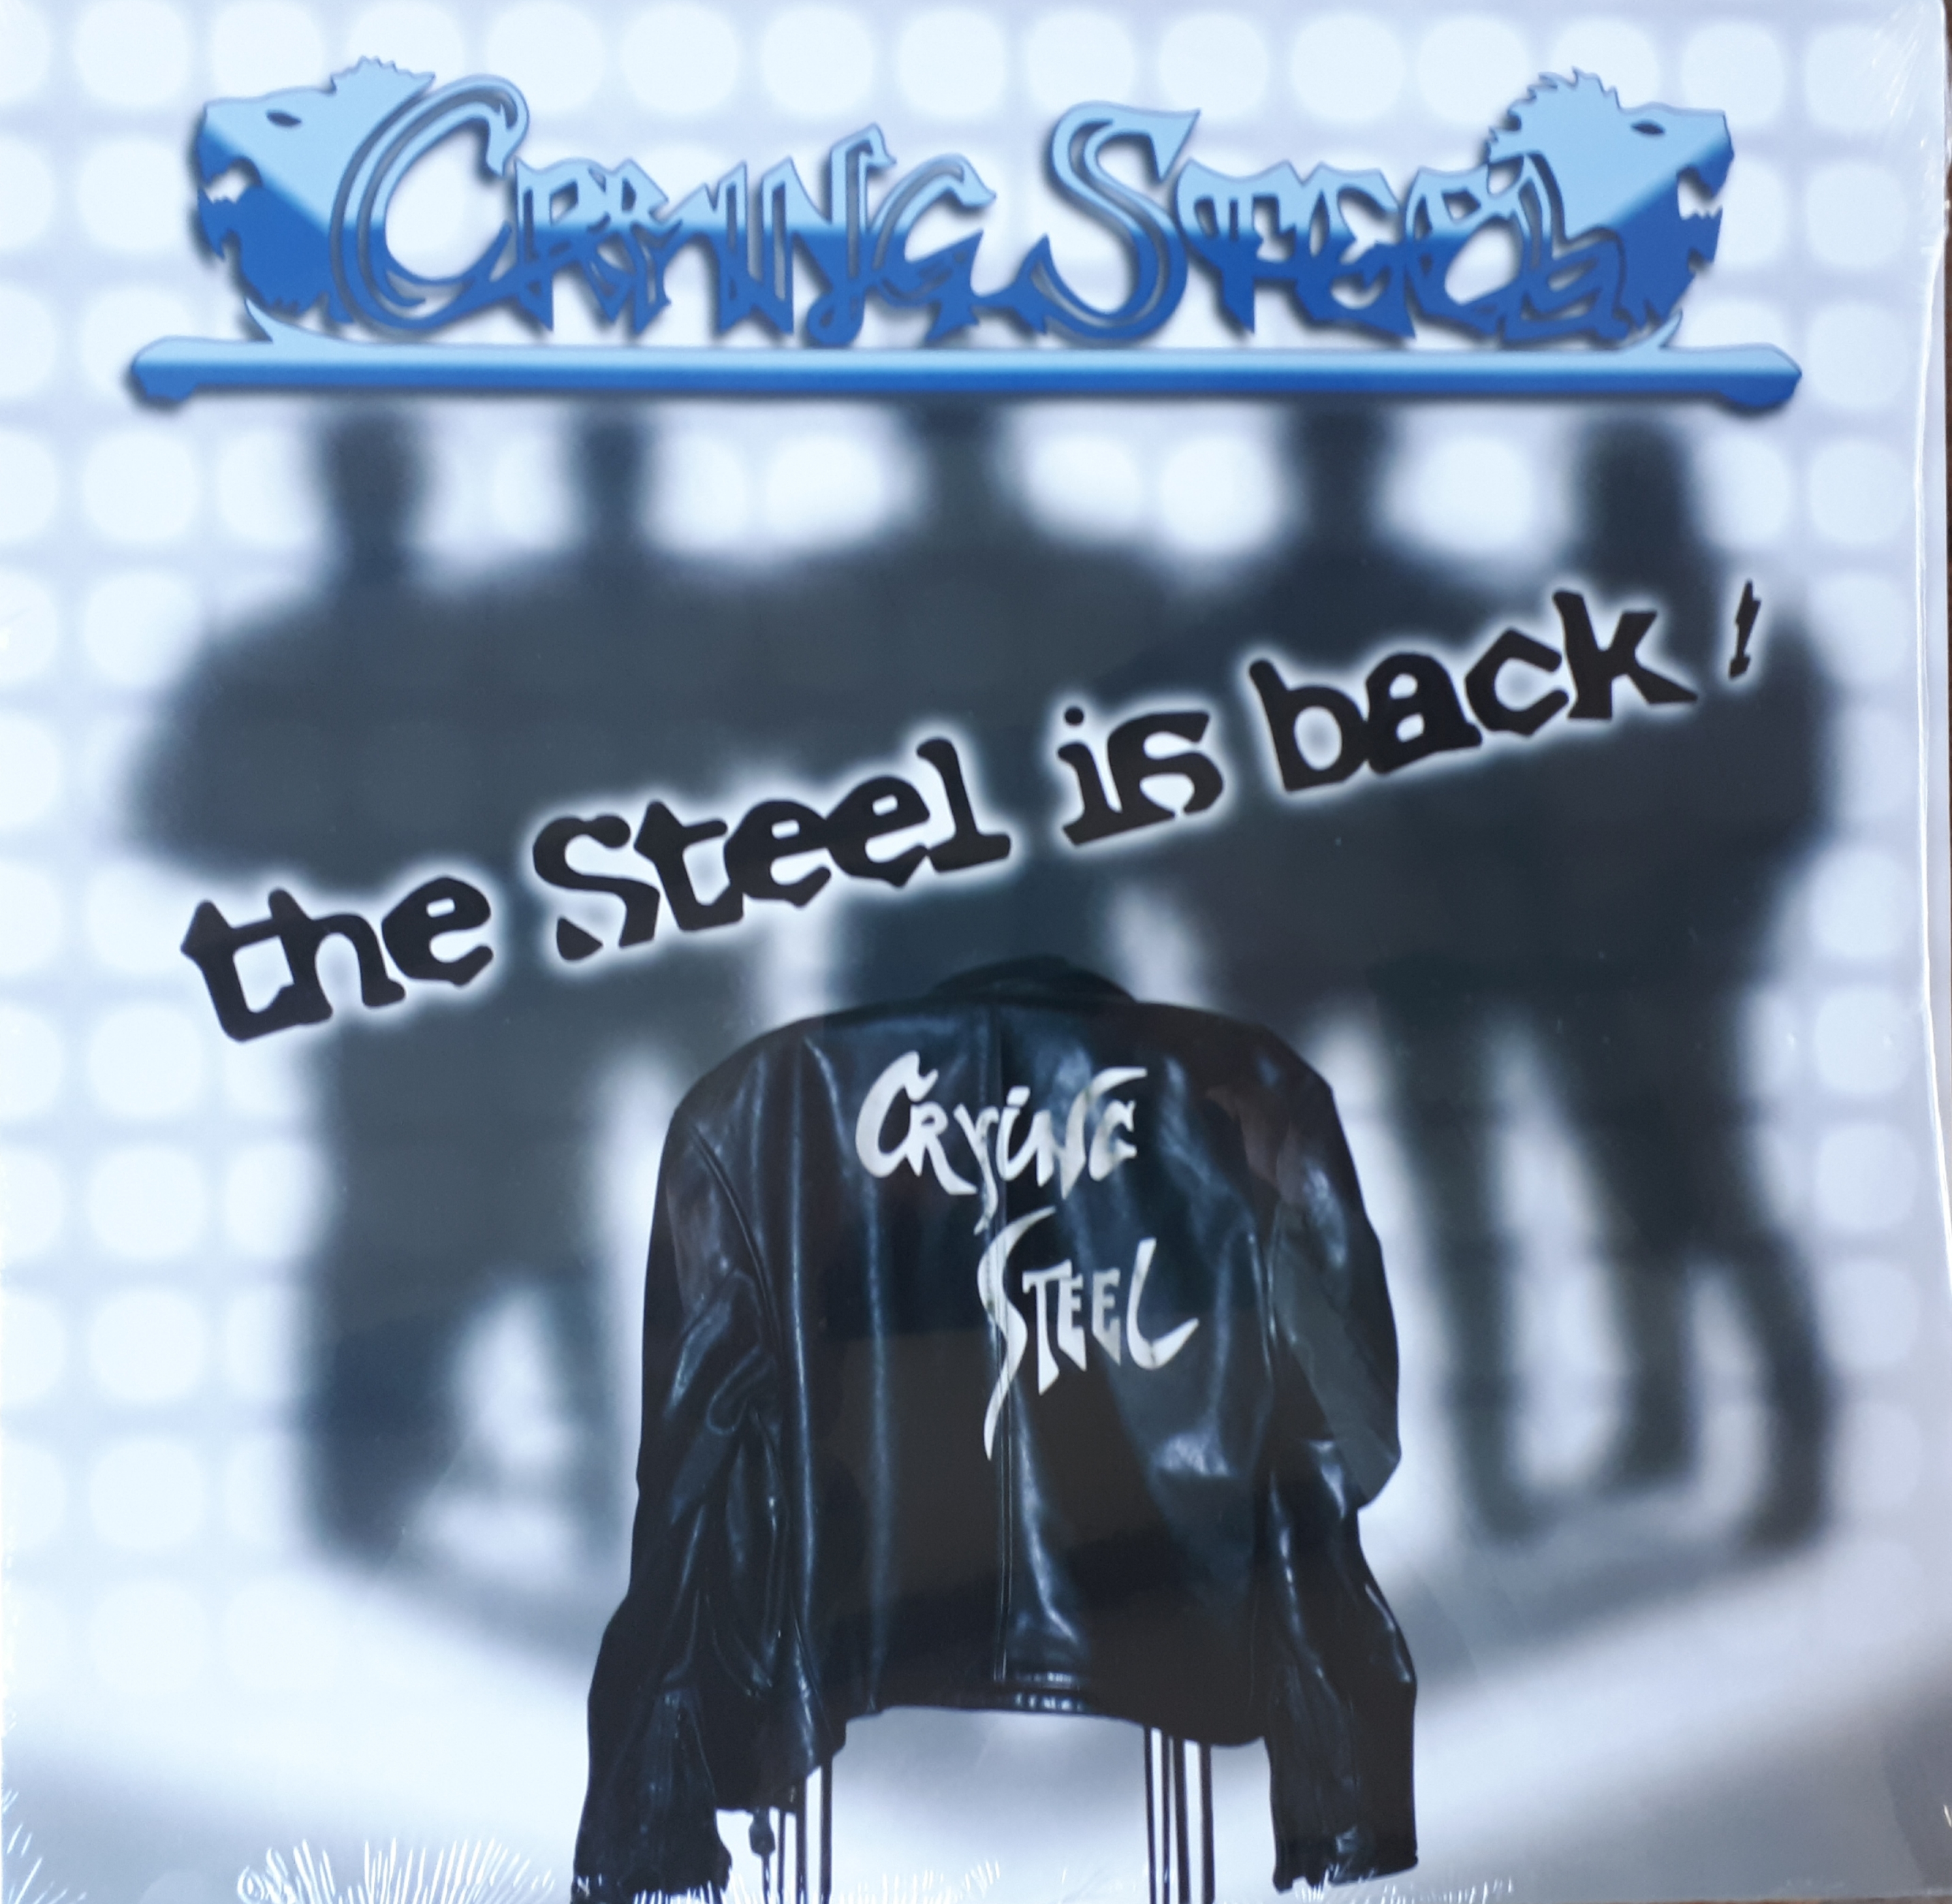 Crying Steel - The Steel is back